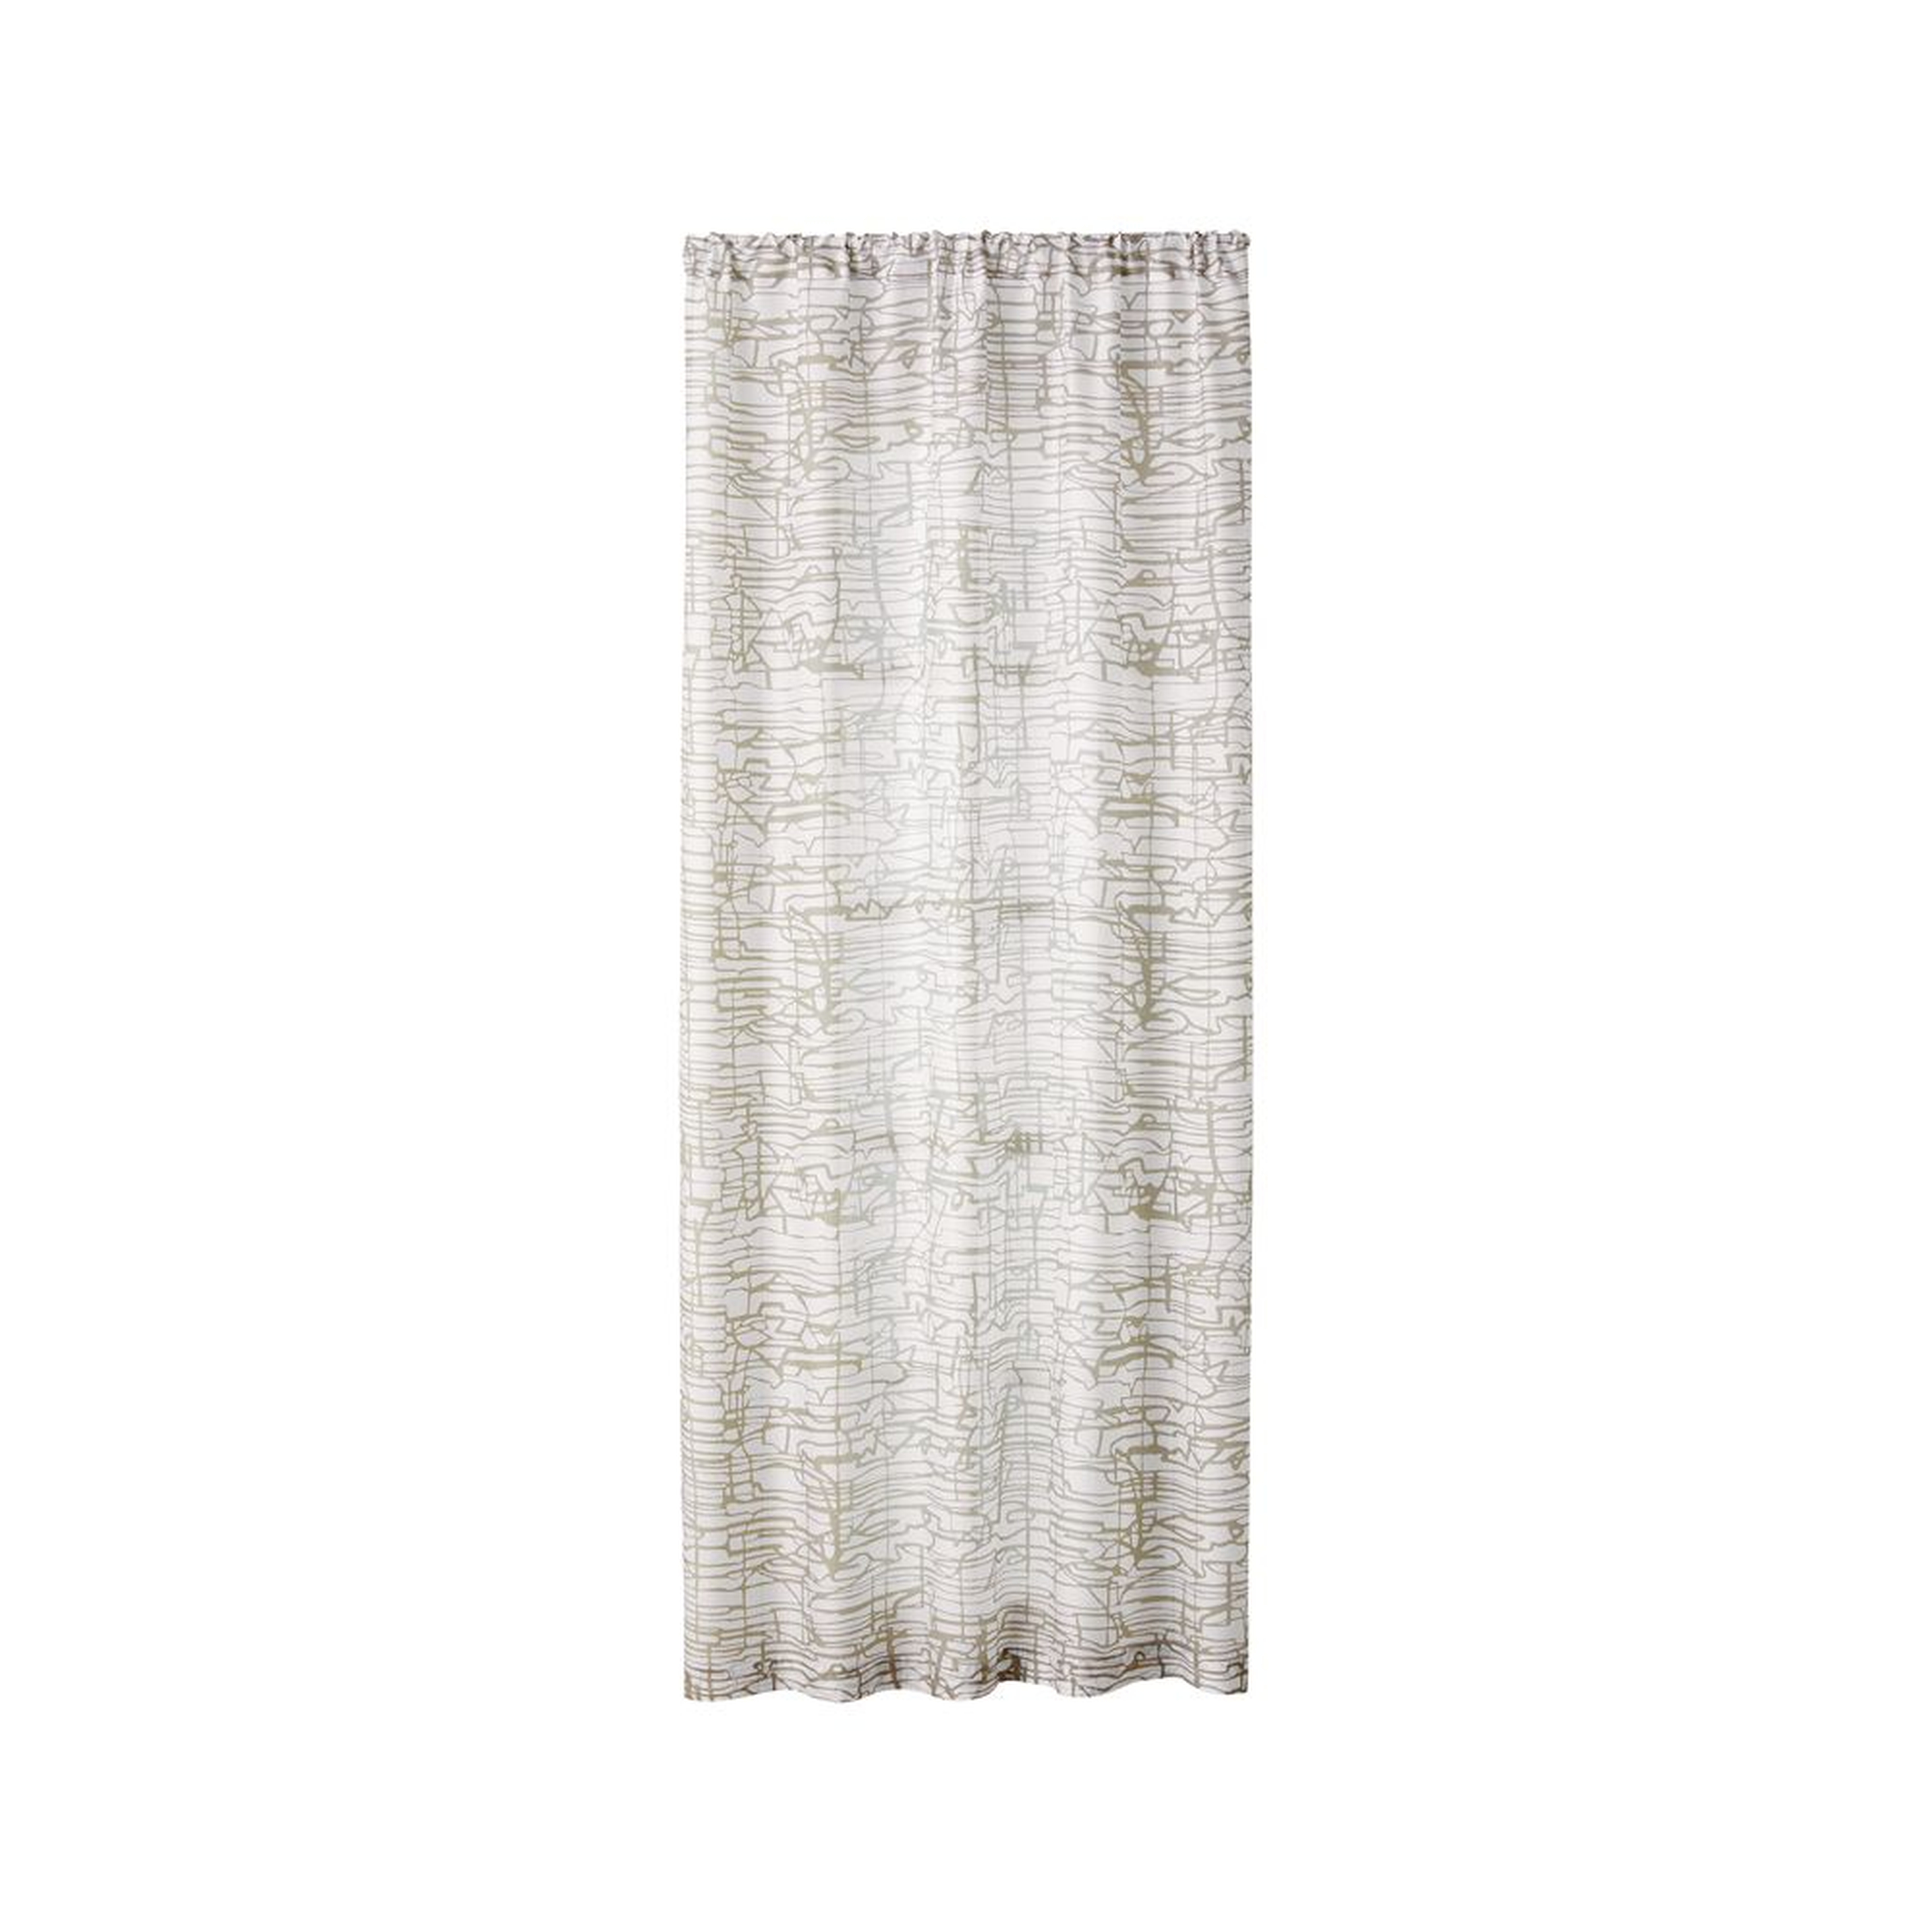 Muriel Printed Sheer Curtain Panel 48"x84" - Crate and Barrel